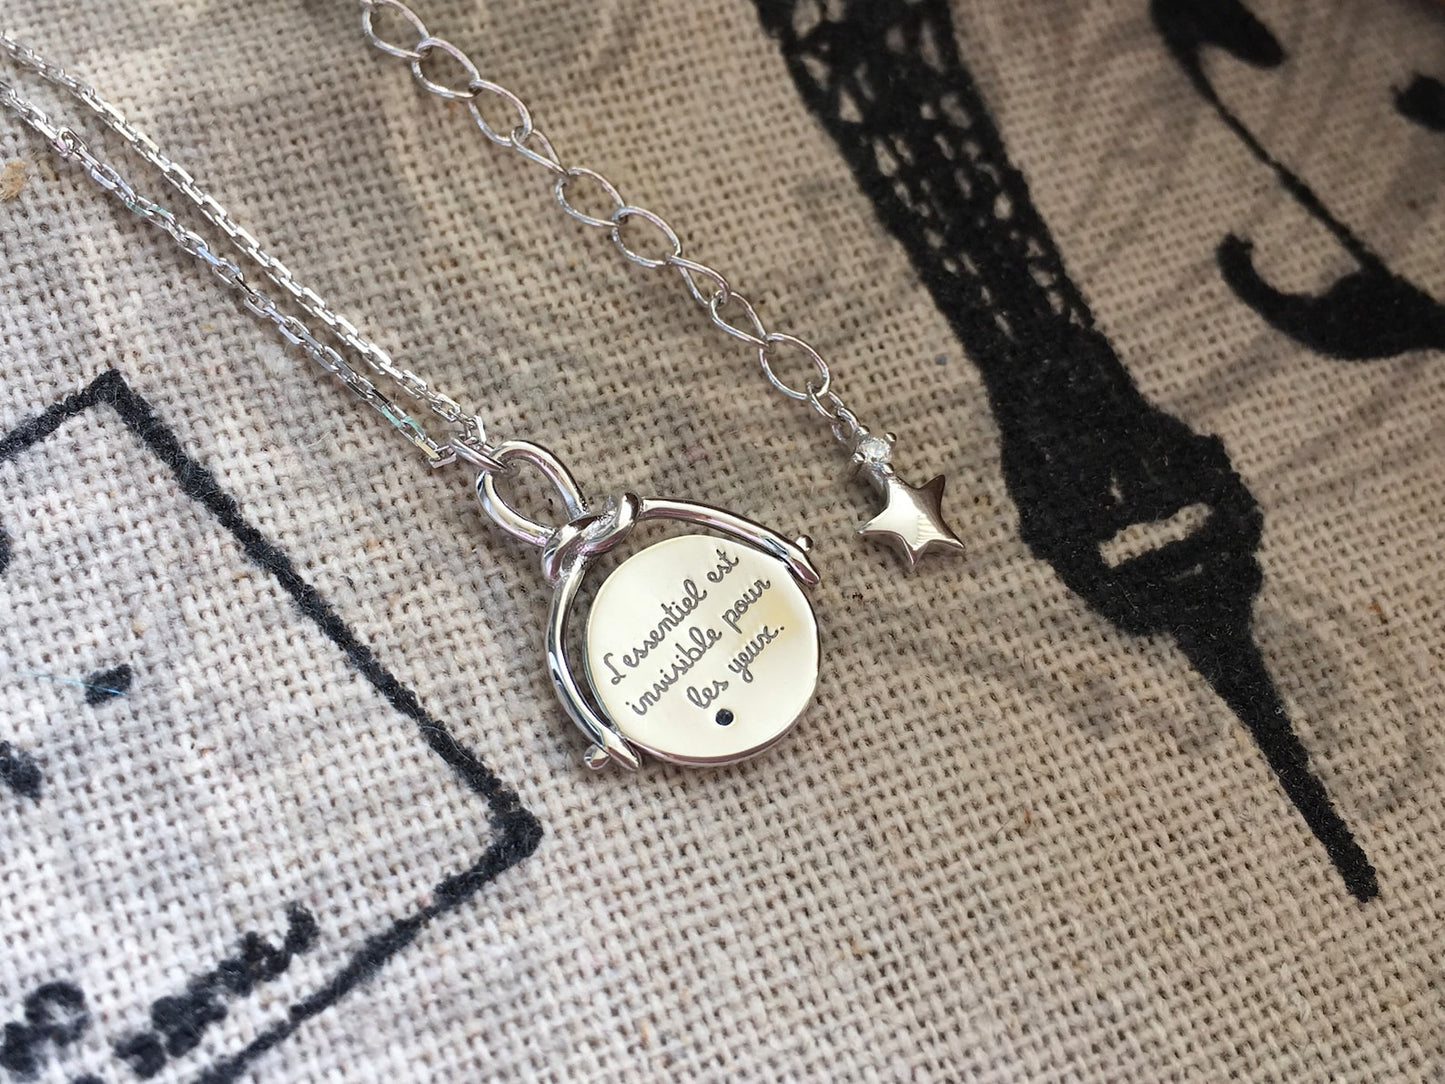 The Prince Necklace Sterling Silver 925 - Le Prince - Coin - Quote "The essential is invisible to the eye"